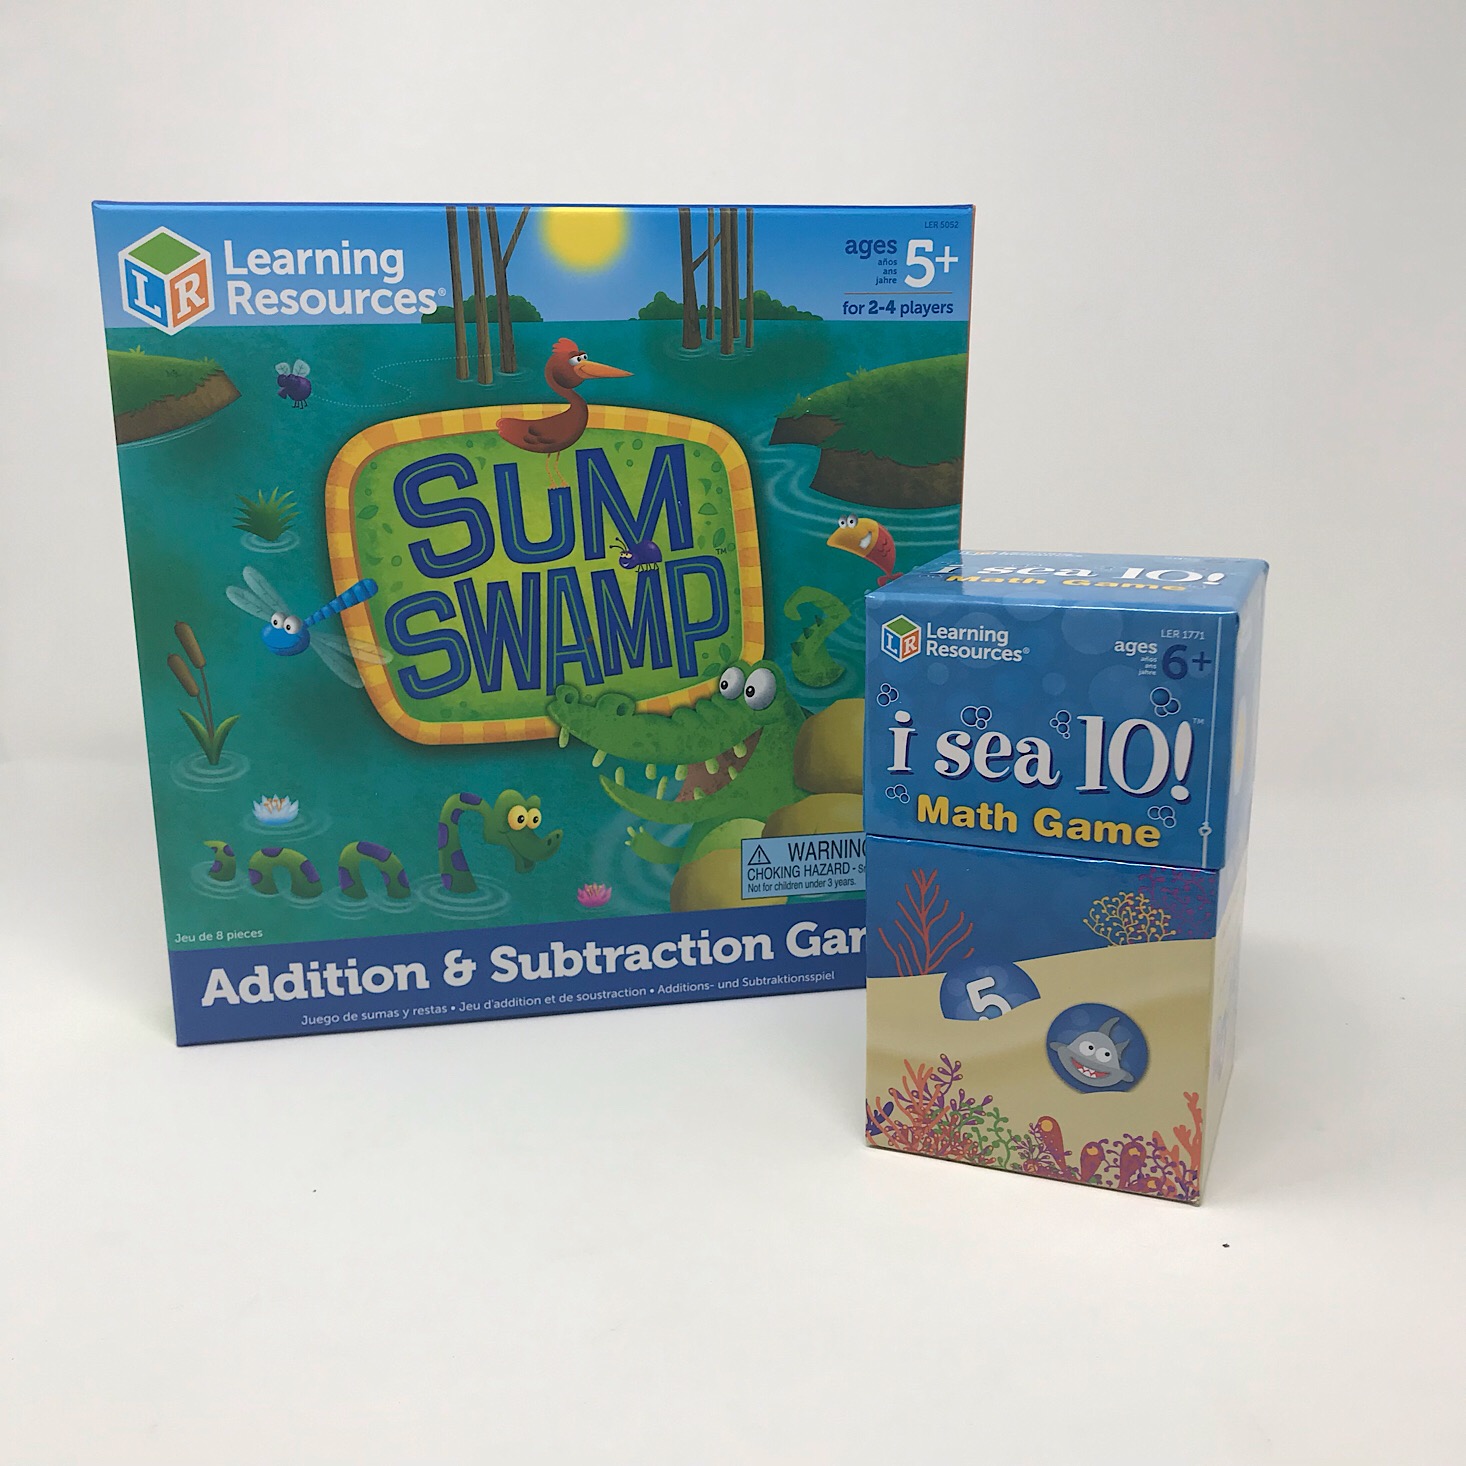 Amazon STEM Toy Club Review, Ages 5 to 7: Learning Resources Math Adventure Pack